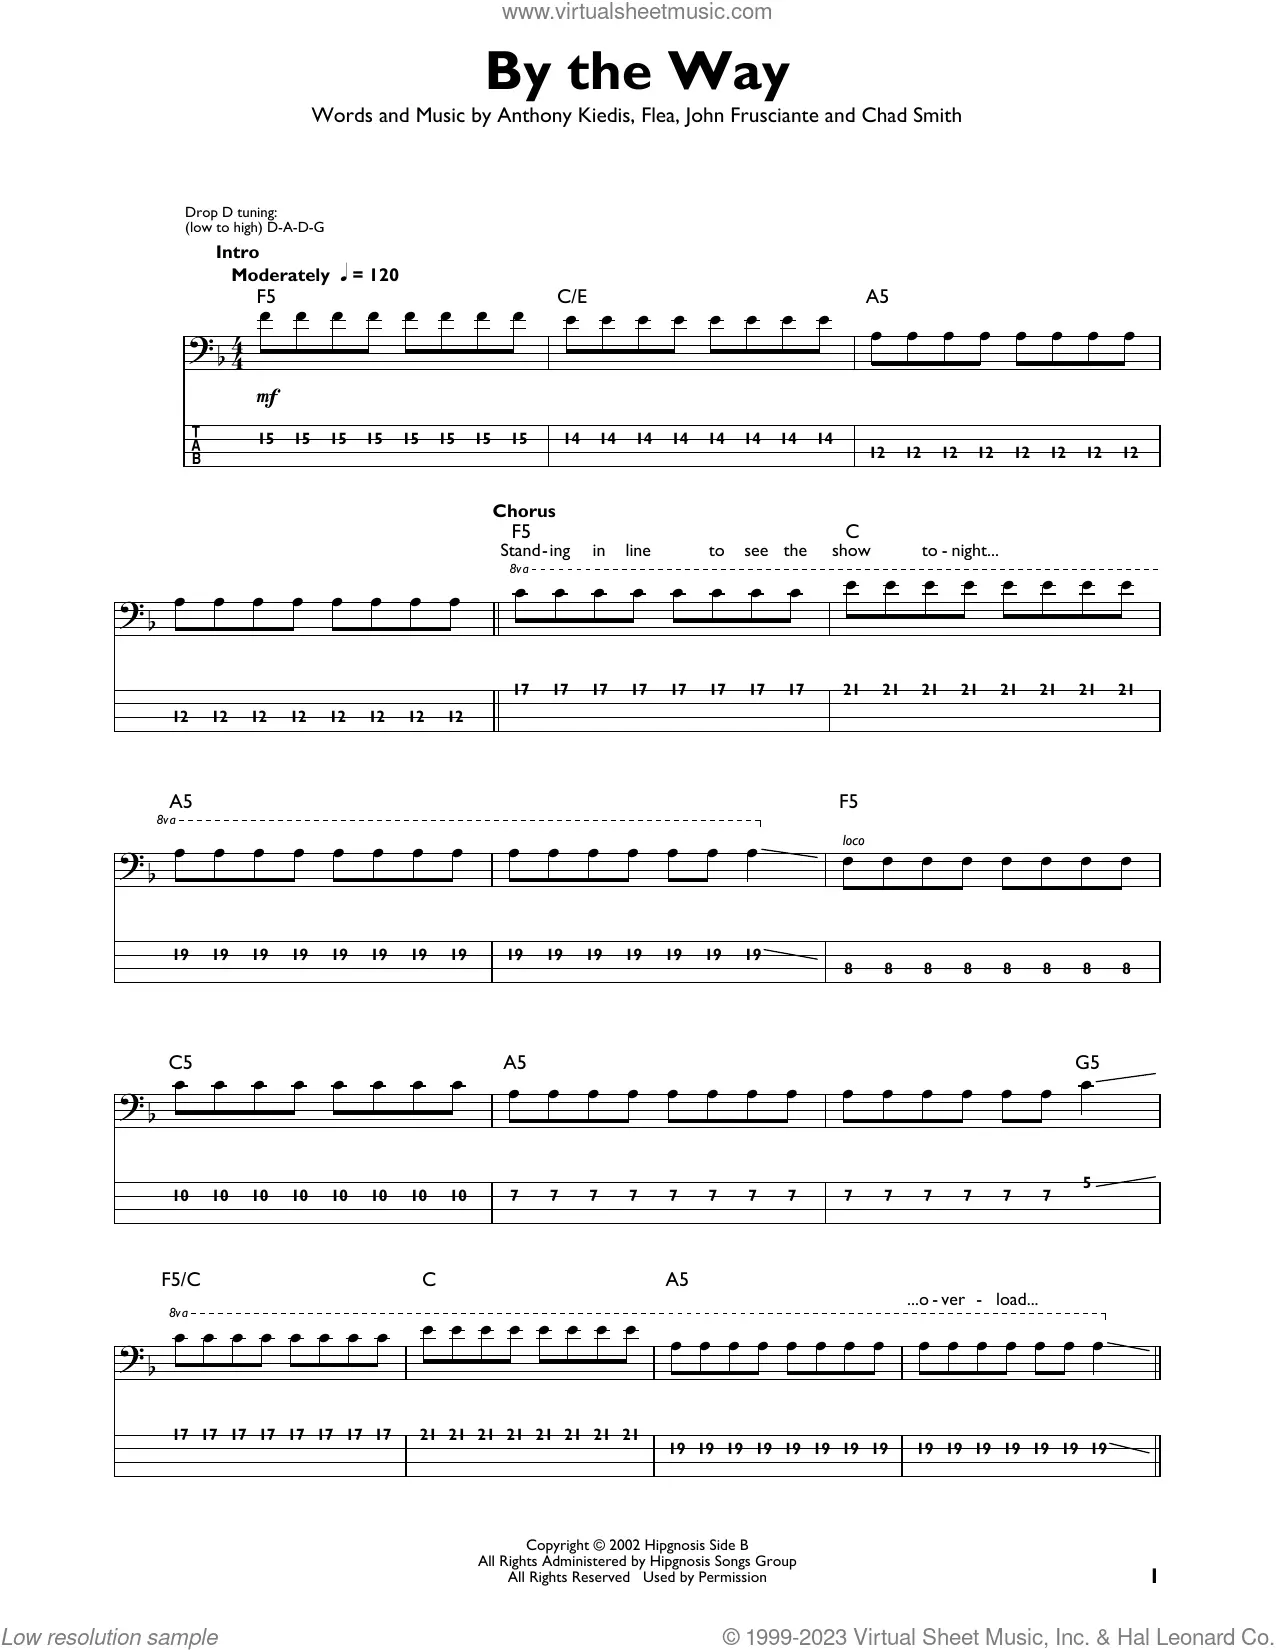 Snow halation – μ's But Shawty's Like A Melody Sheet music for